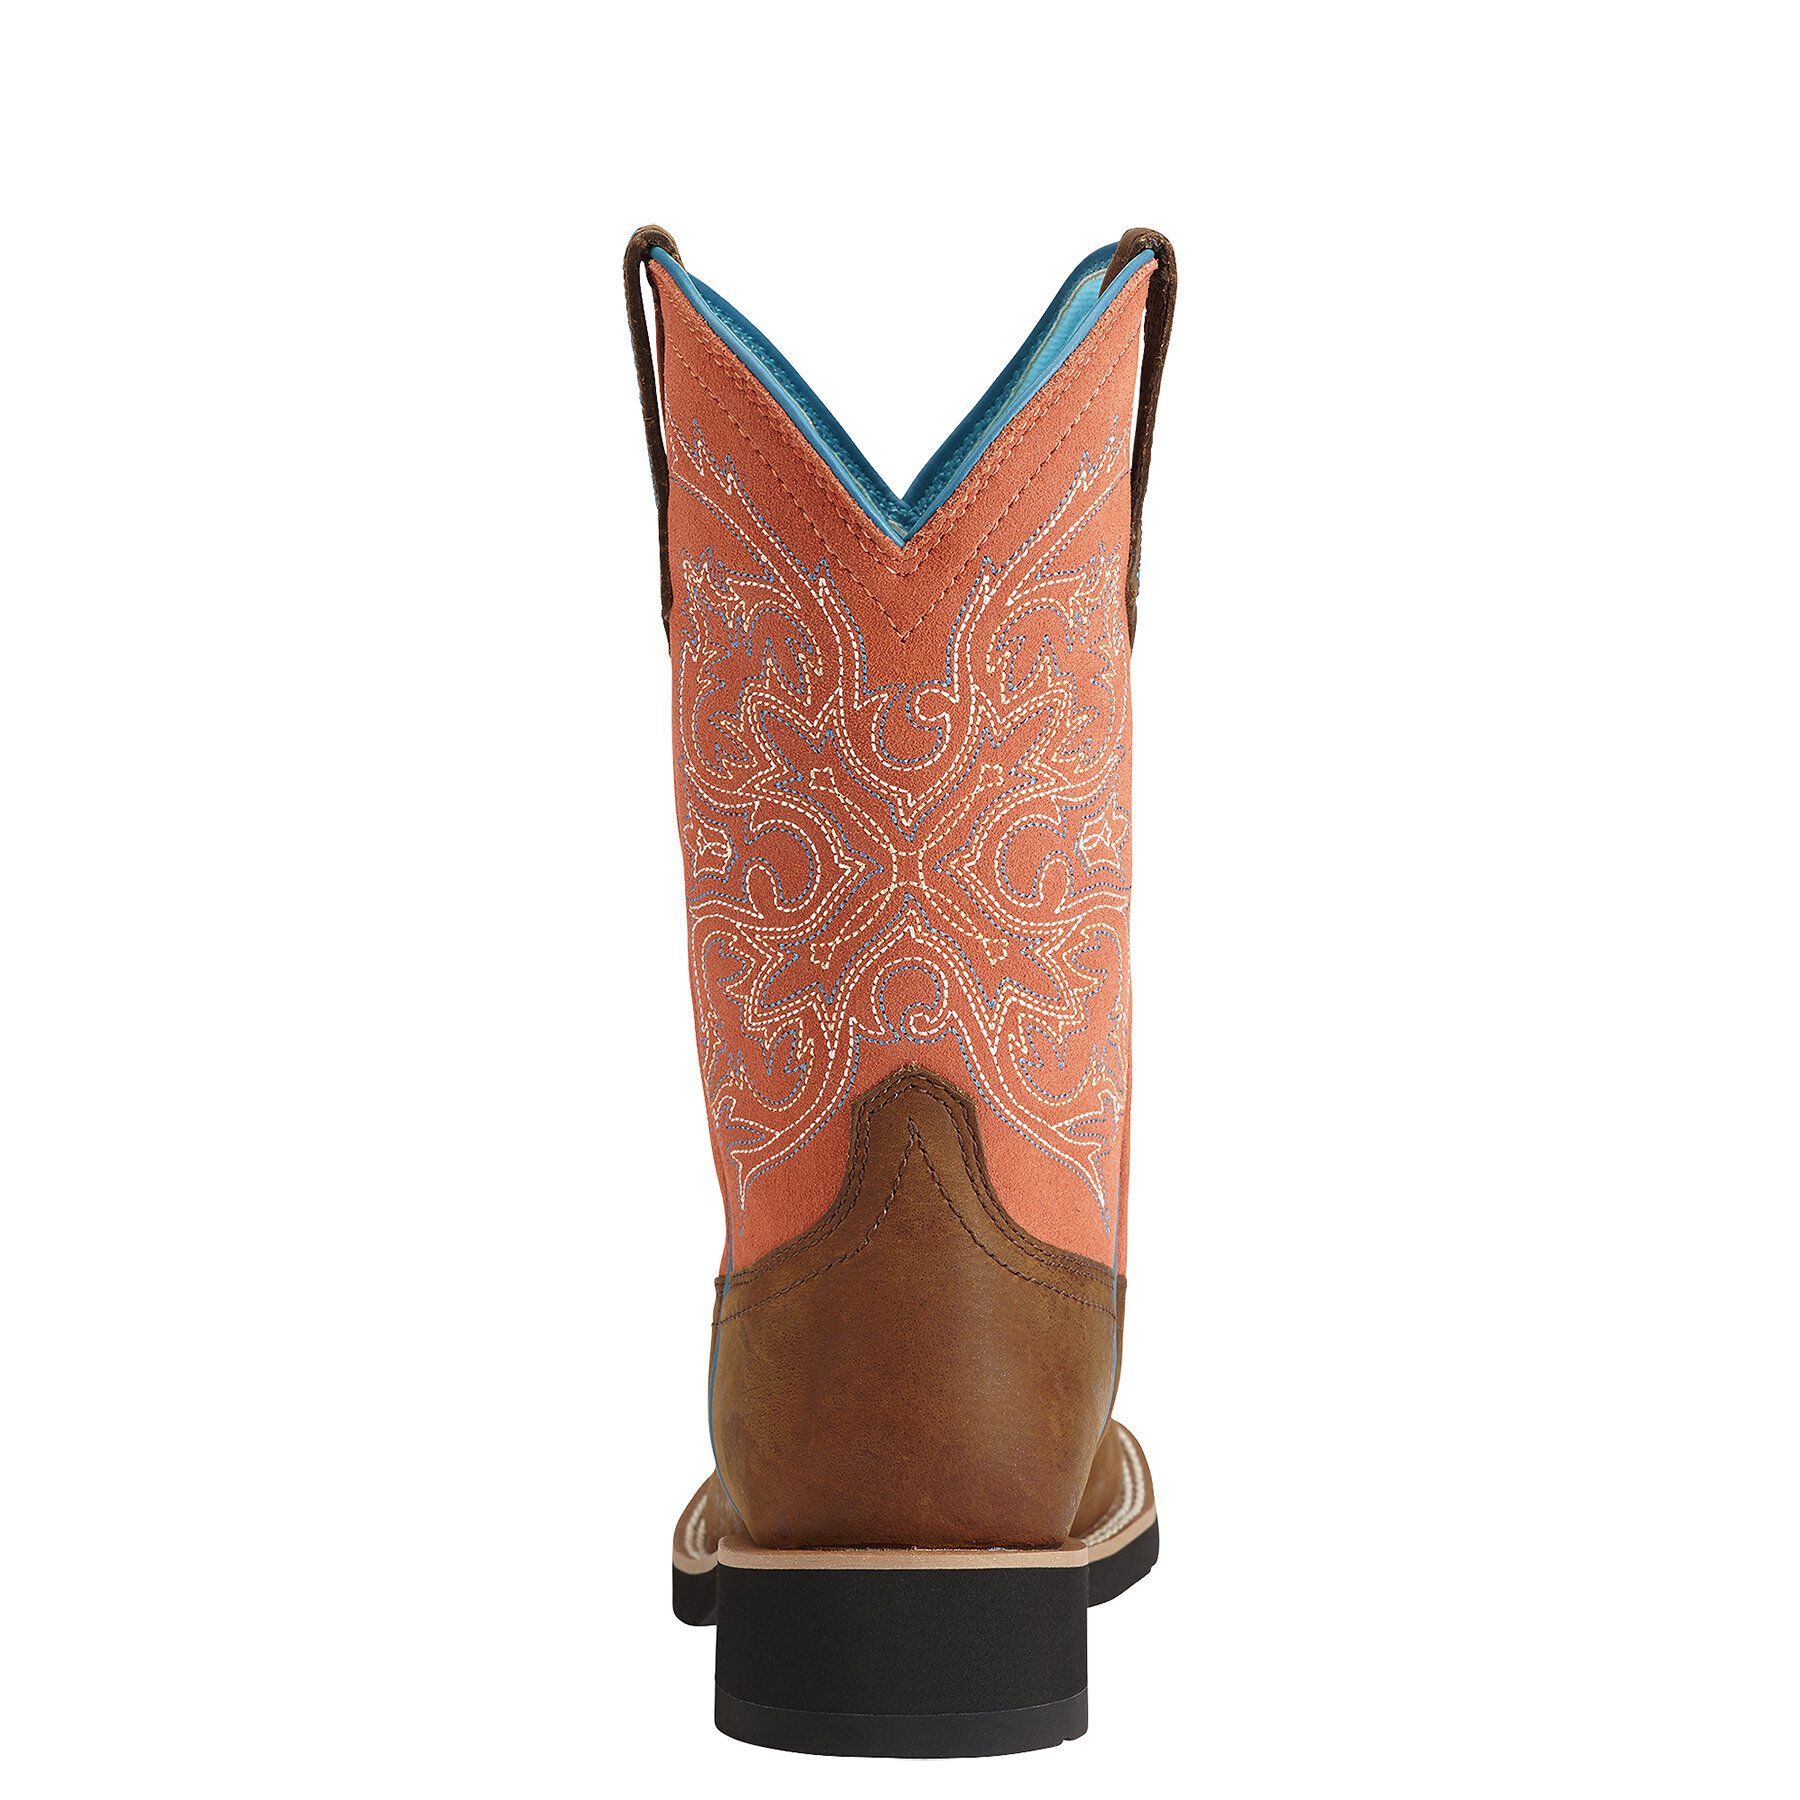 ariat fatbaby tall boots